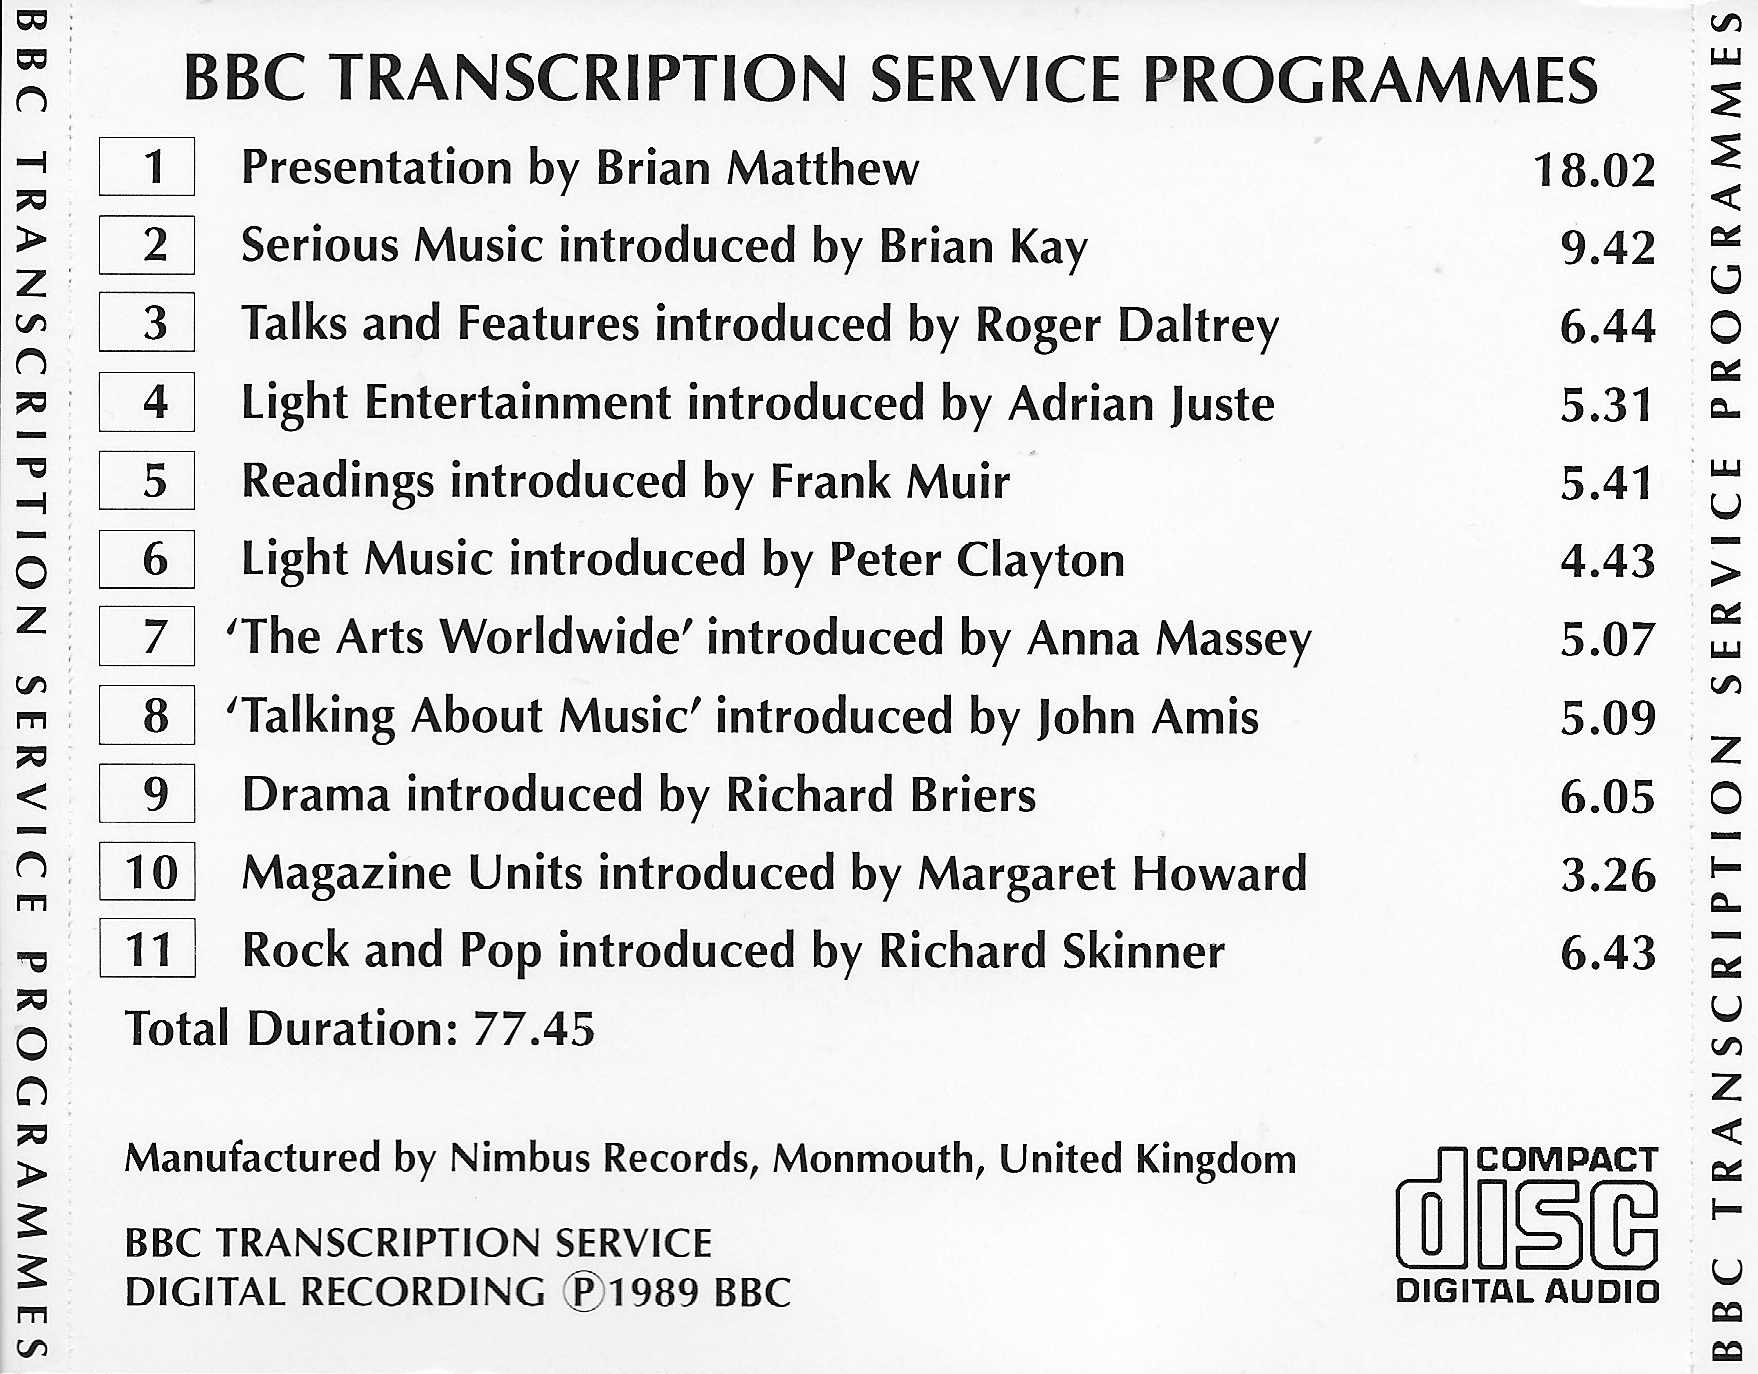 Picture of TCD 0001 BBC Transcription Programmes by artist Various from the BBC records and Tapes library